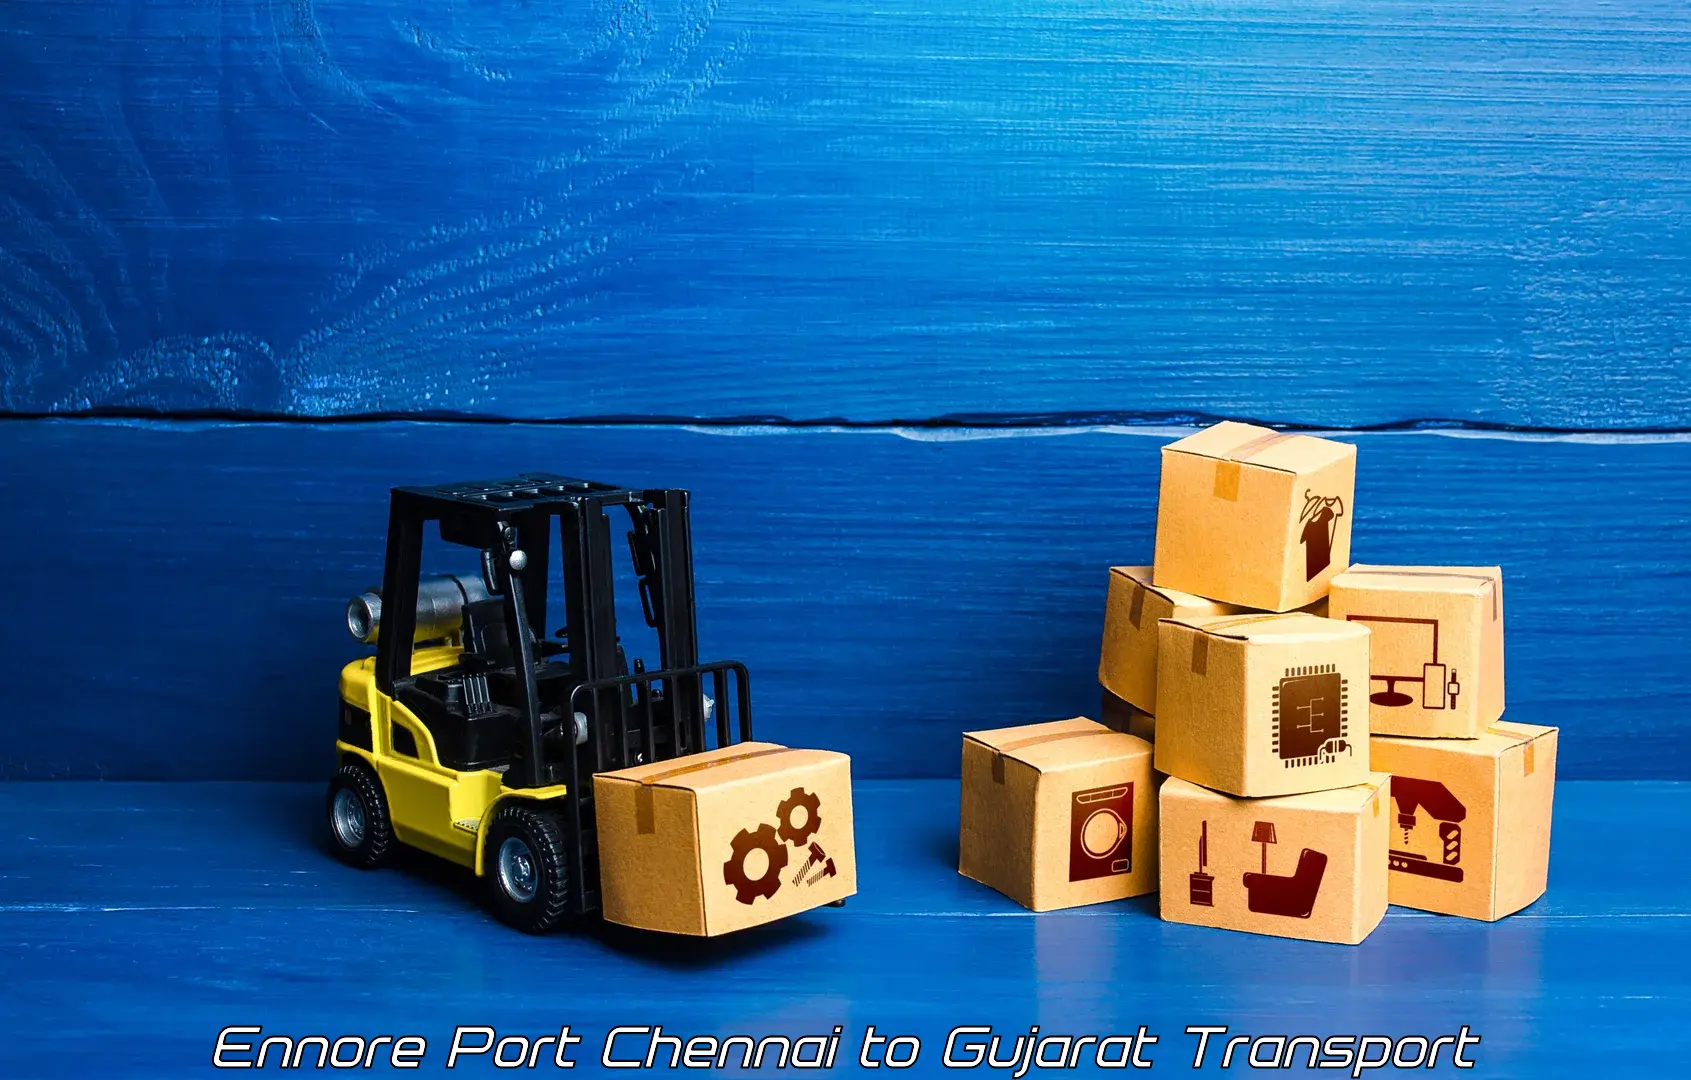 Goods delivery service Ennore Port Chennai to GIDC